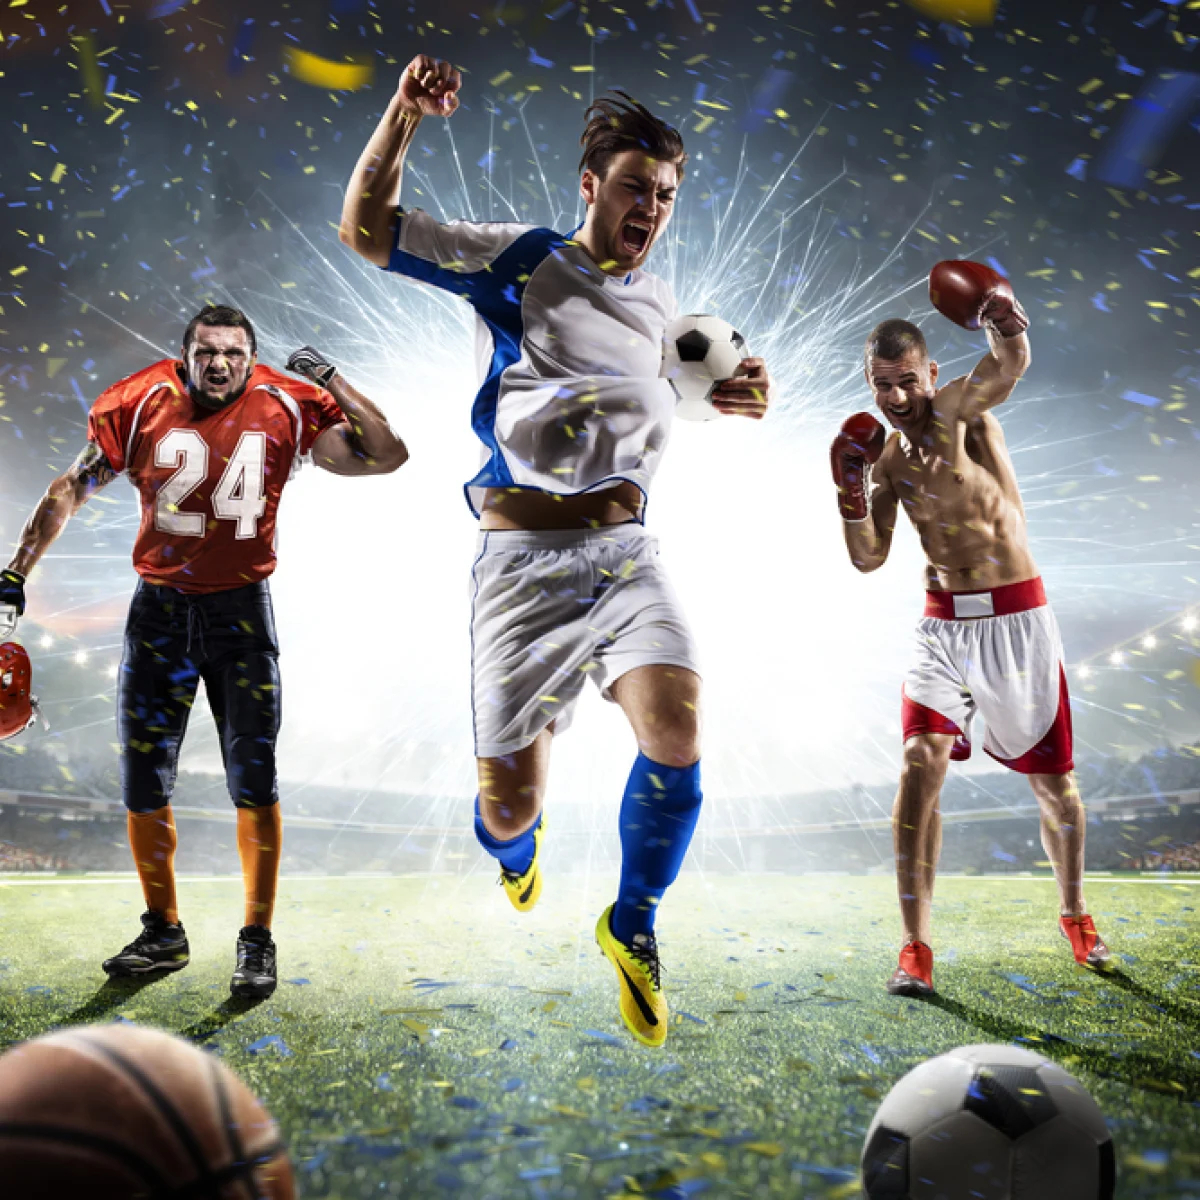 SportsBay - Watch Latest Sports Live And Free Here